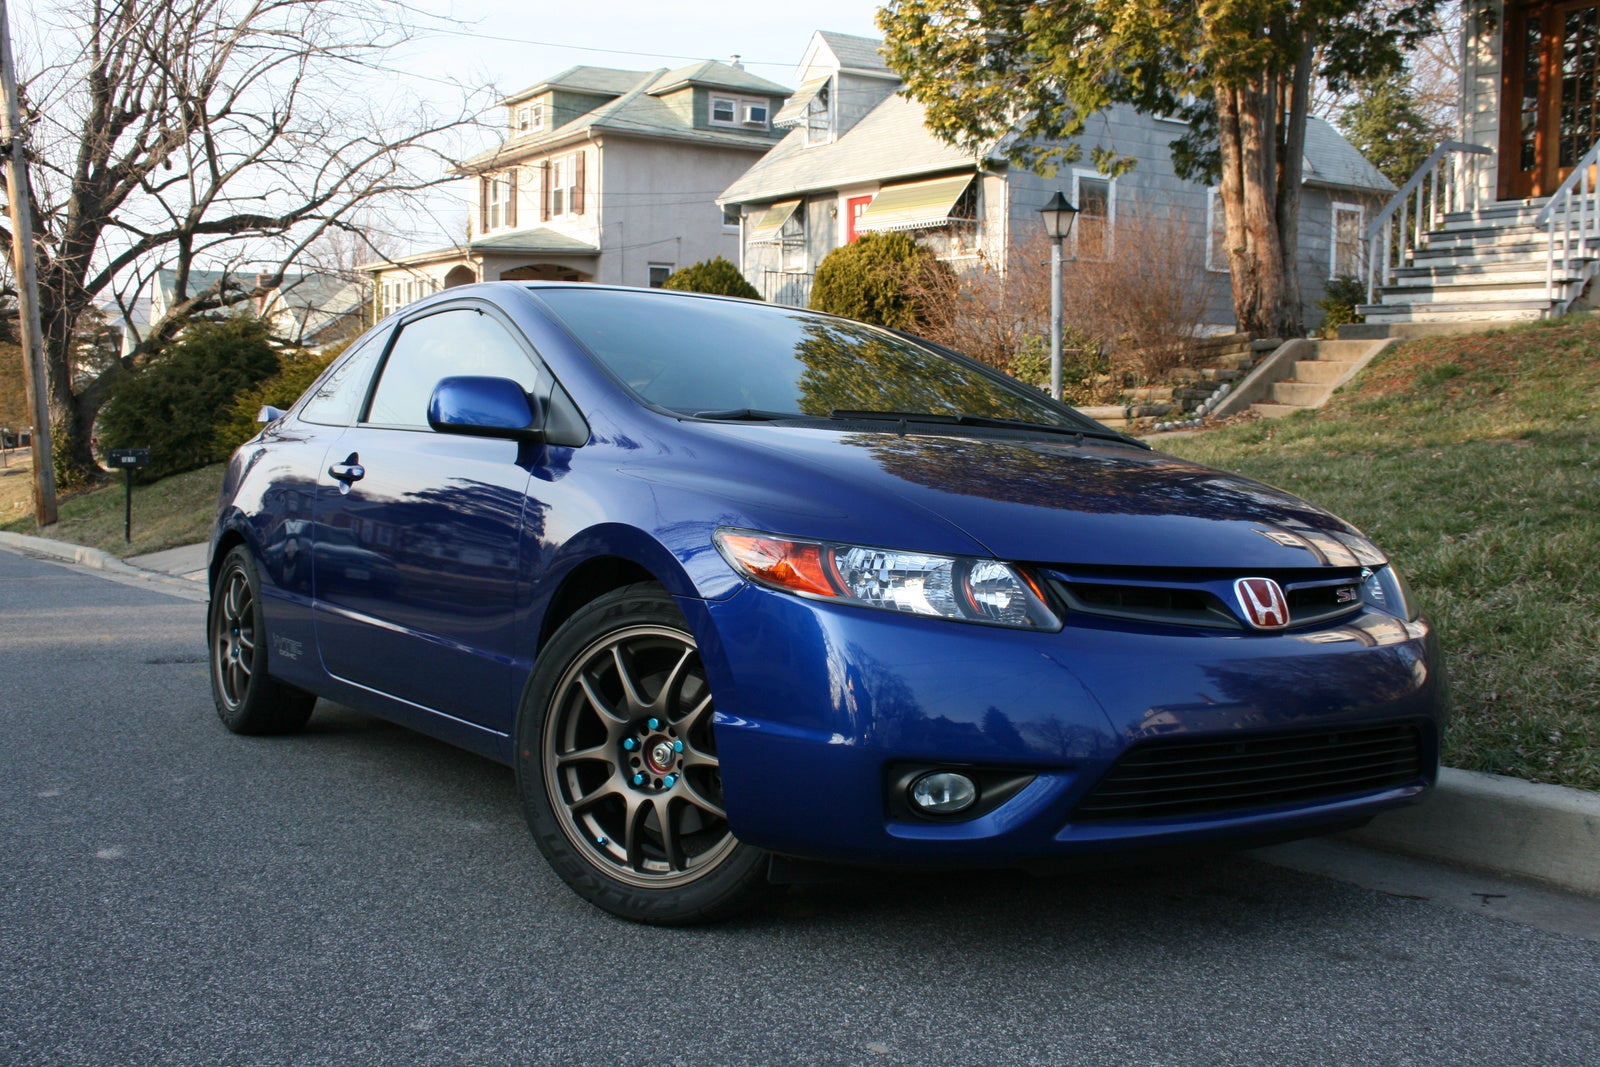 2006 Honda Civic Coupe on 2006 Honda Civic Si Coupe Picture View Garage Roberto Owns This Honda